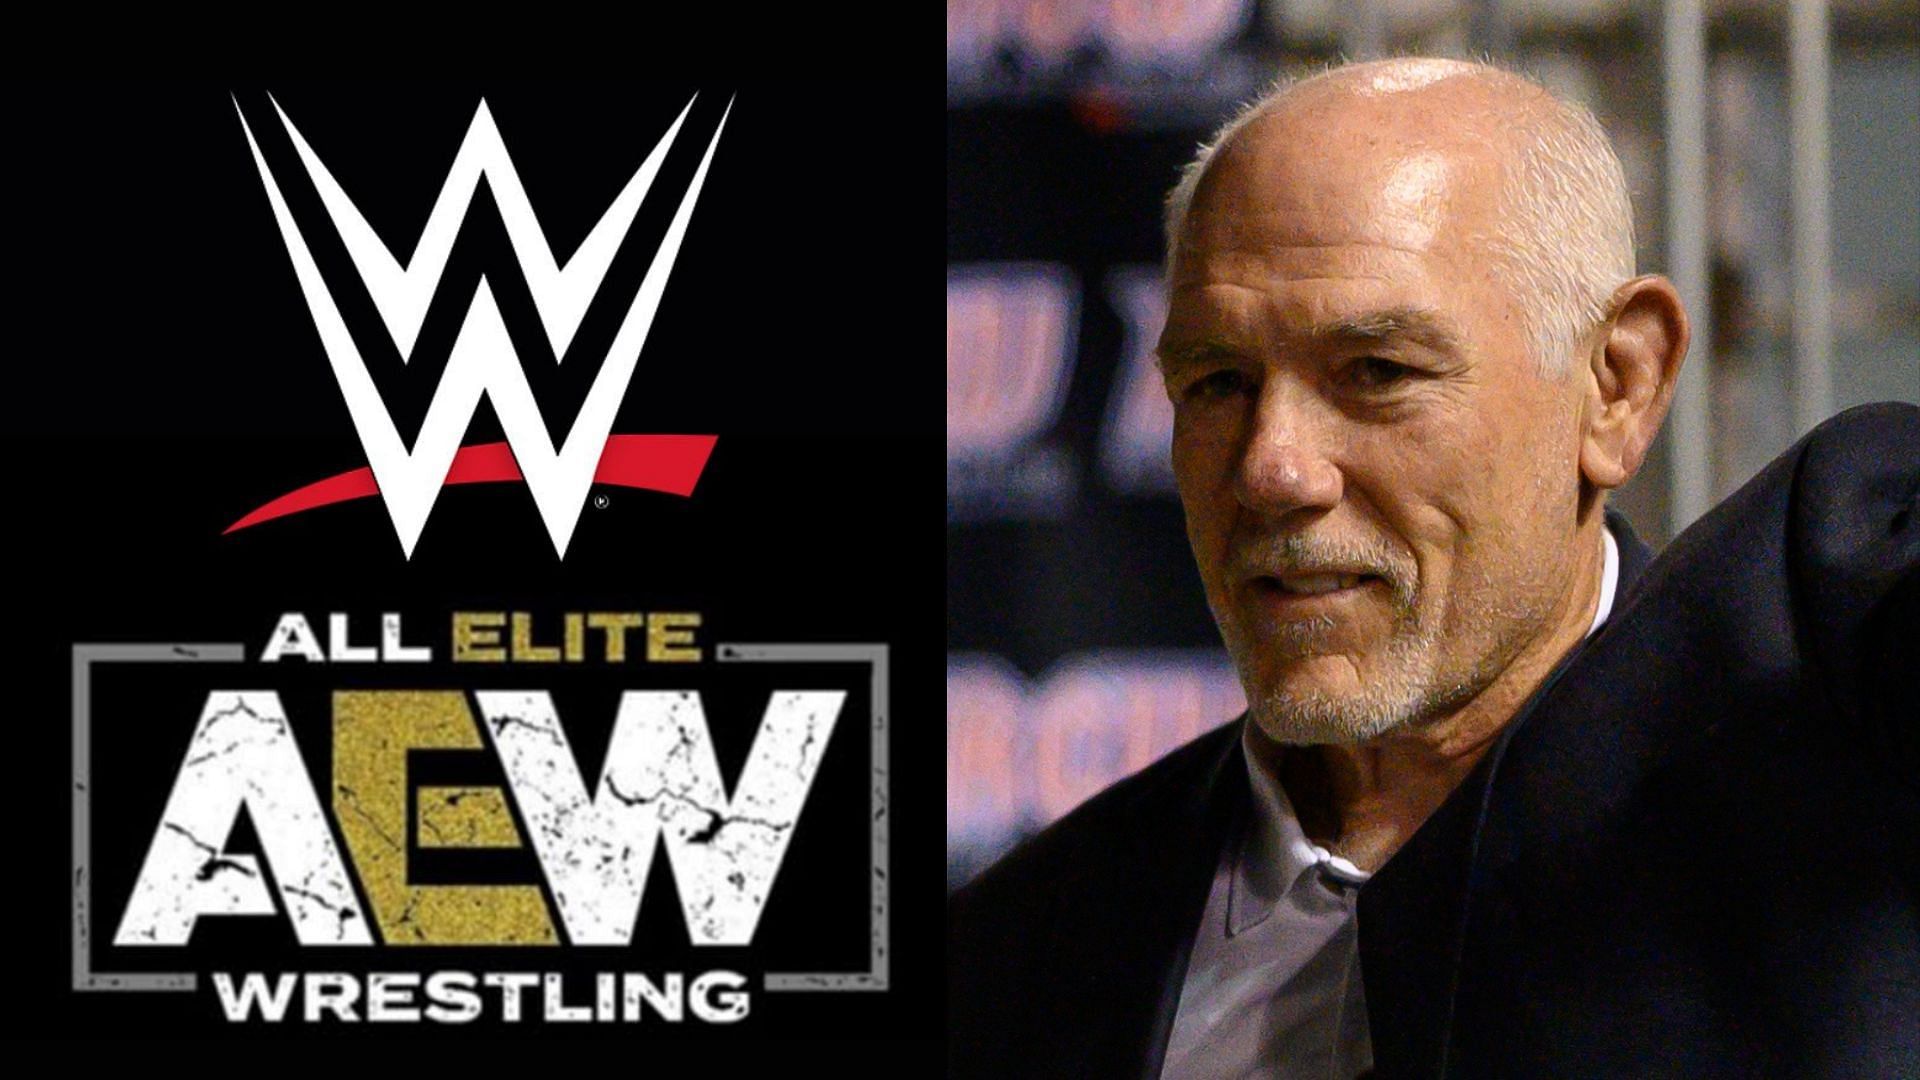 WWE Hall of Famer Tully Blanchard orchestrated a shocking plan this week!